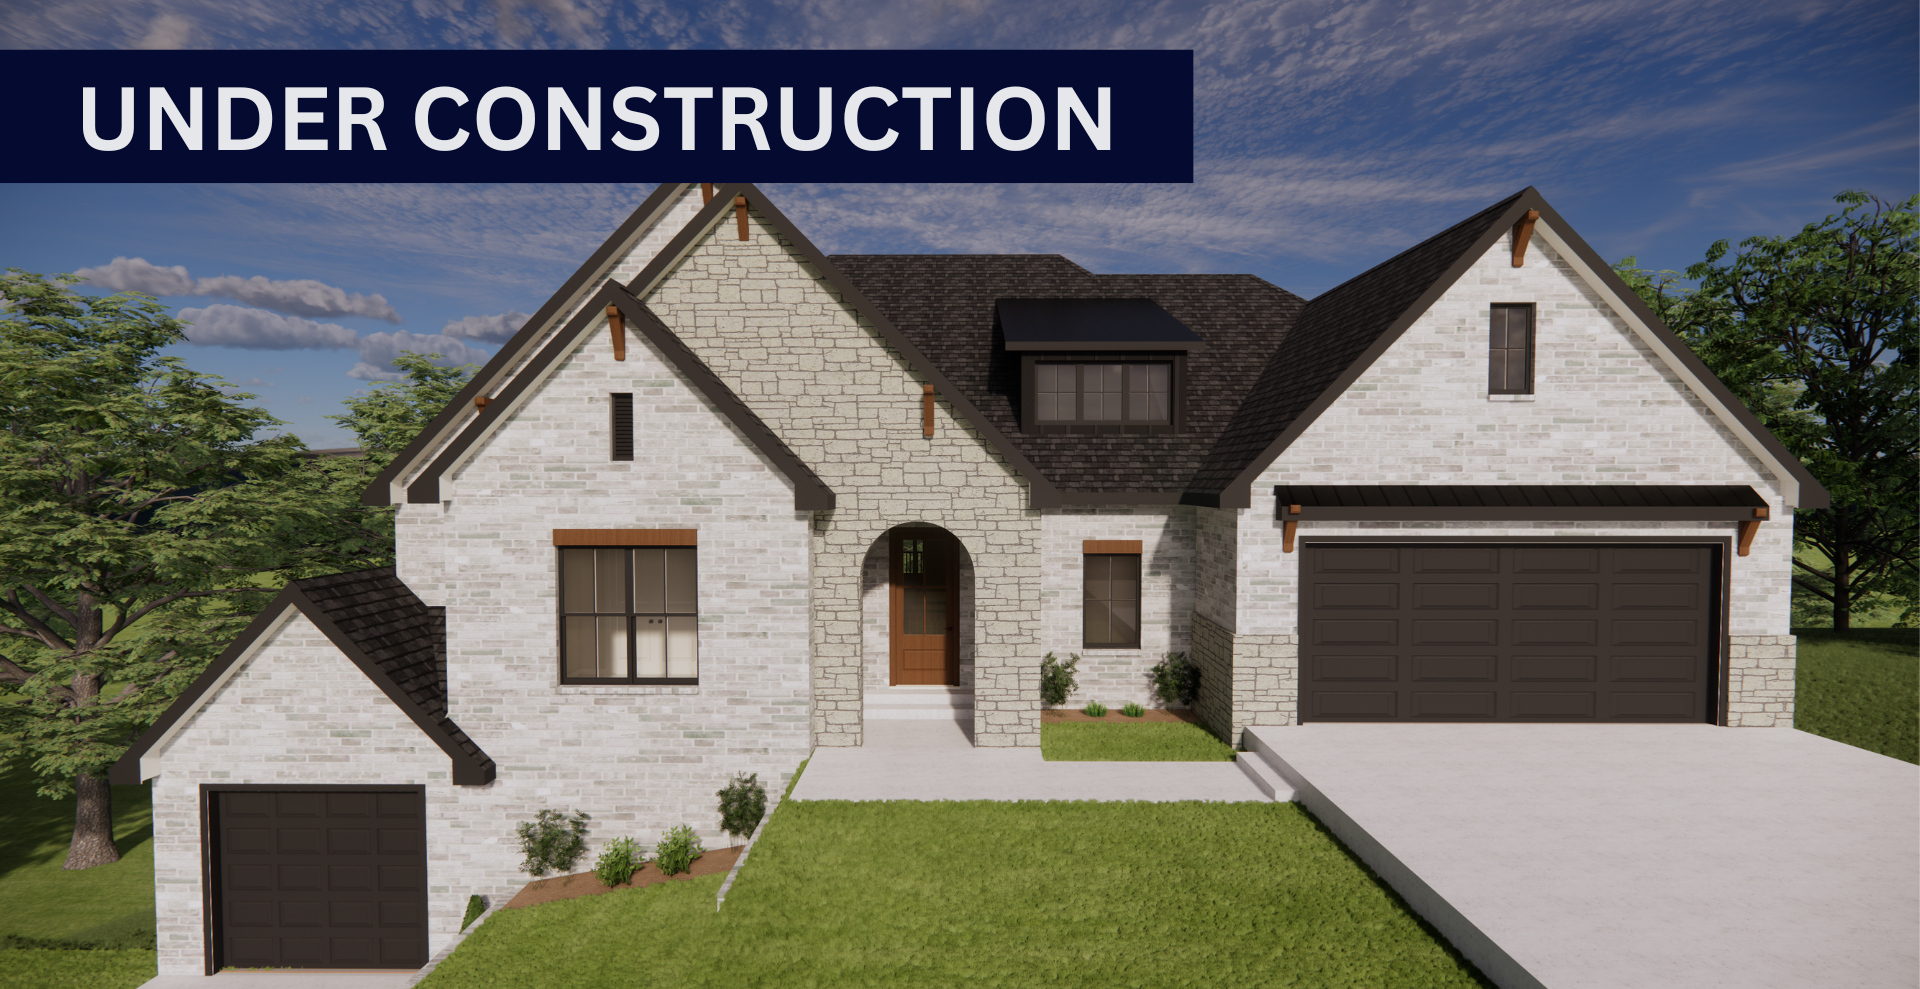 new construction home with brick and stone exterior and third car garage on a lower deck hines homes